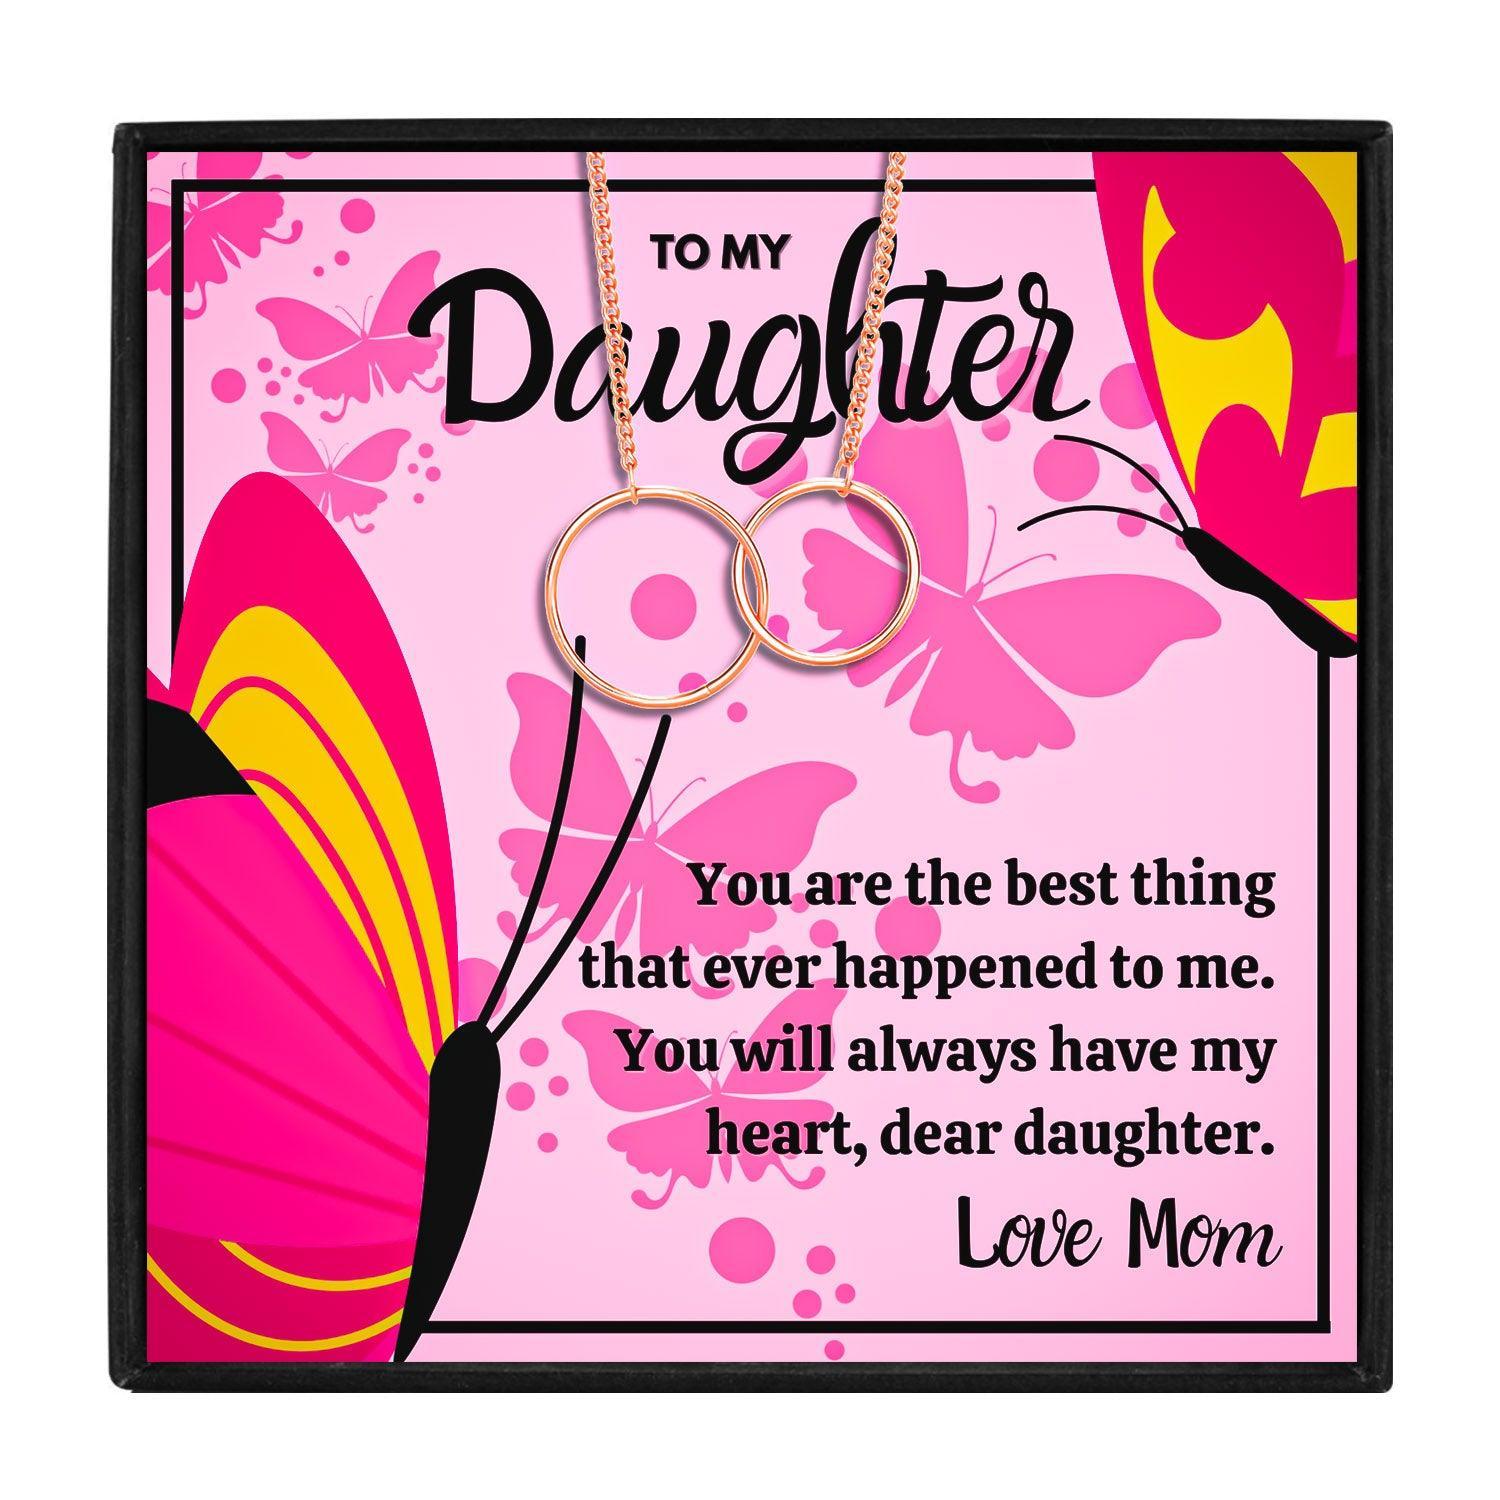 To my daughter necklace from mom on hunnylife – Hunny Life